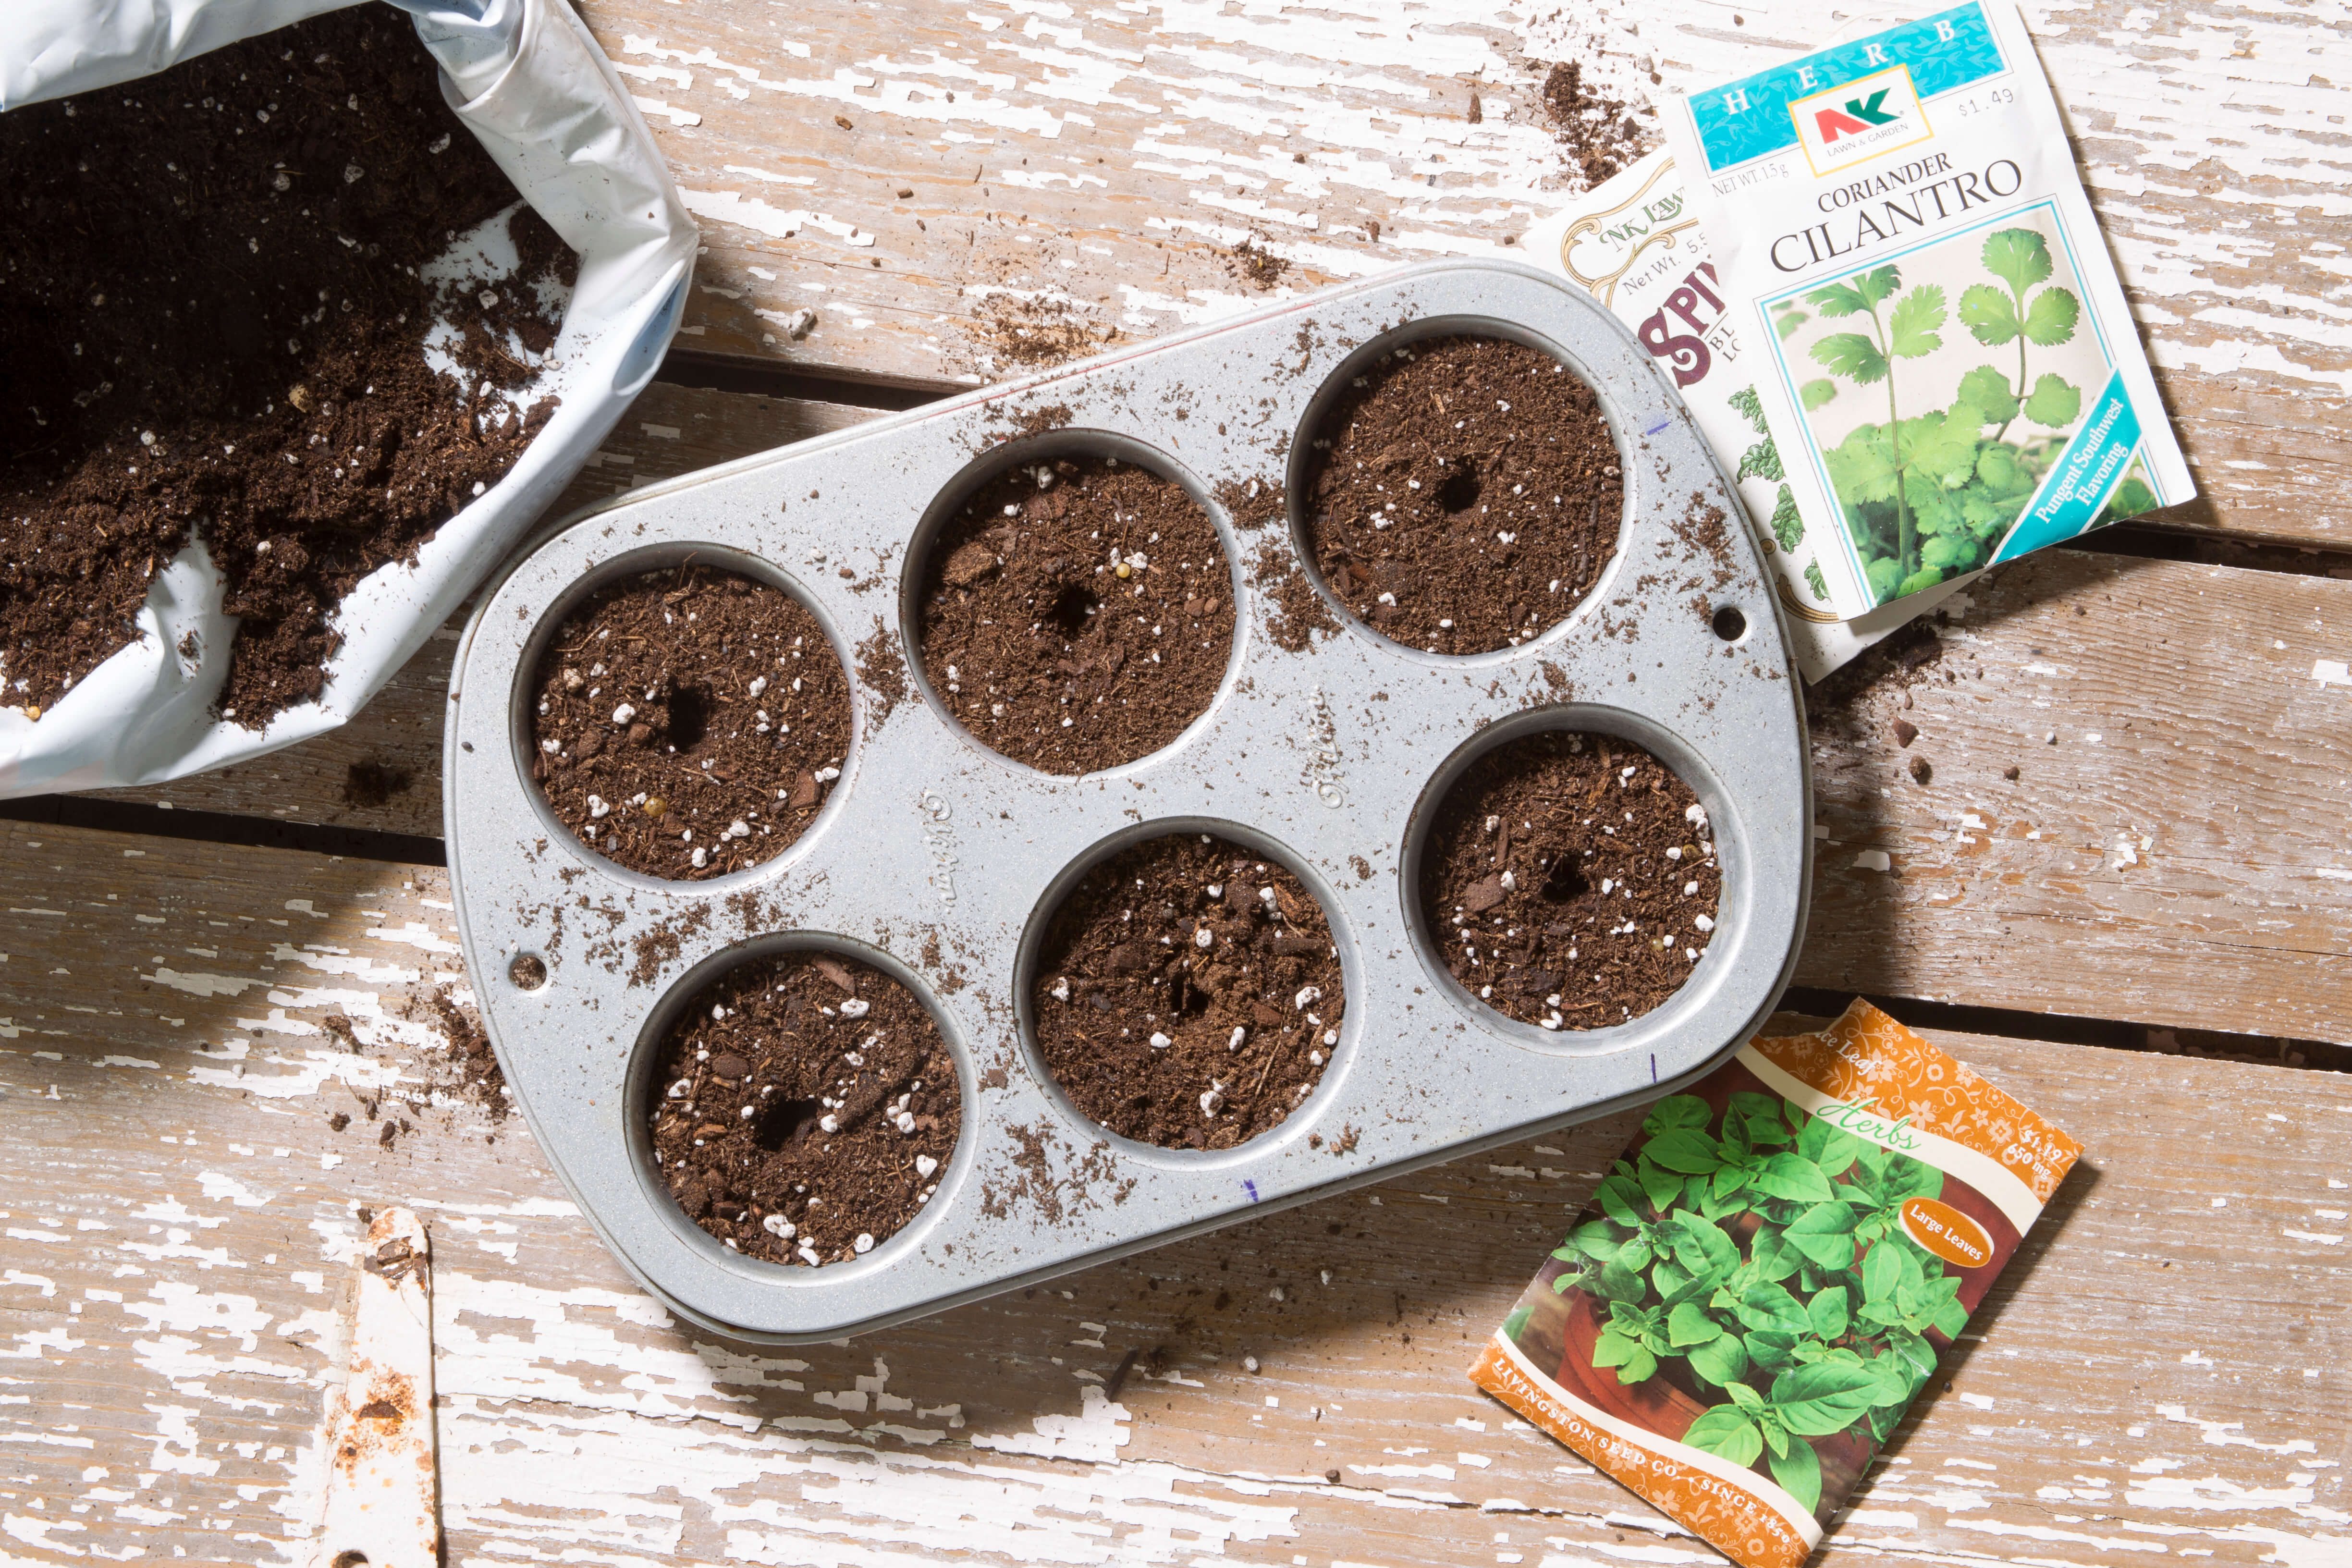 The Absolute Best Uses For Your Muffin Tin